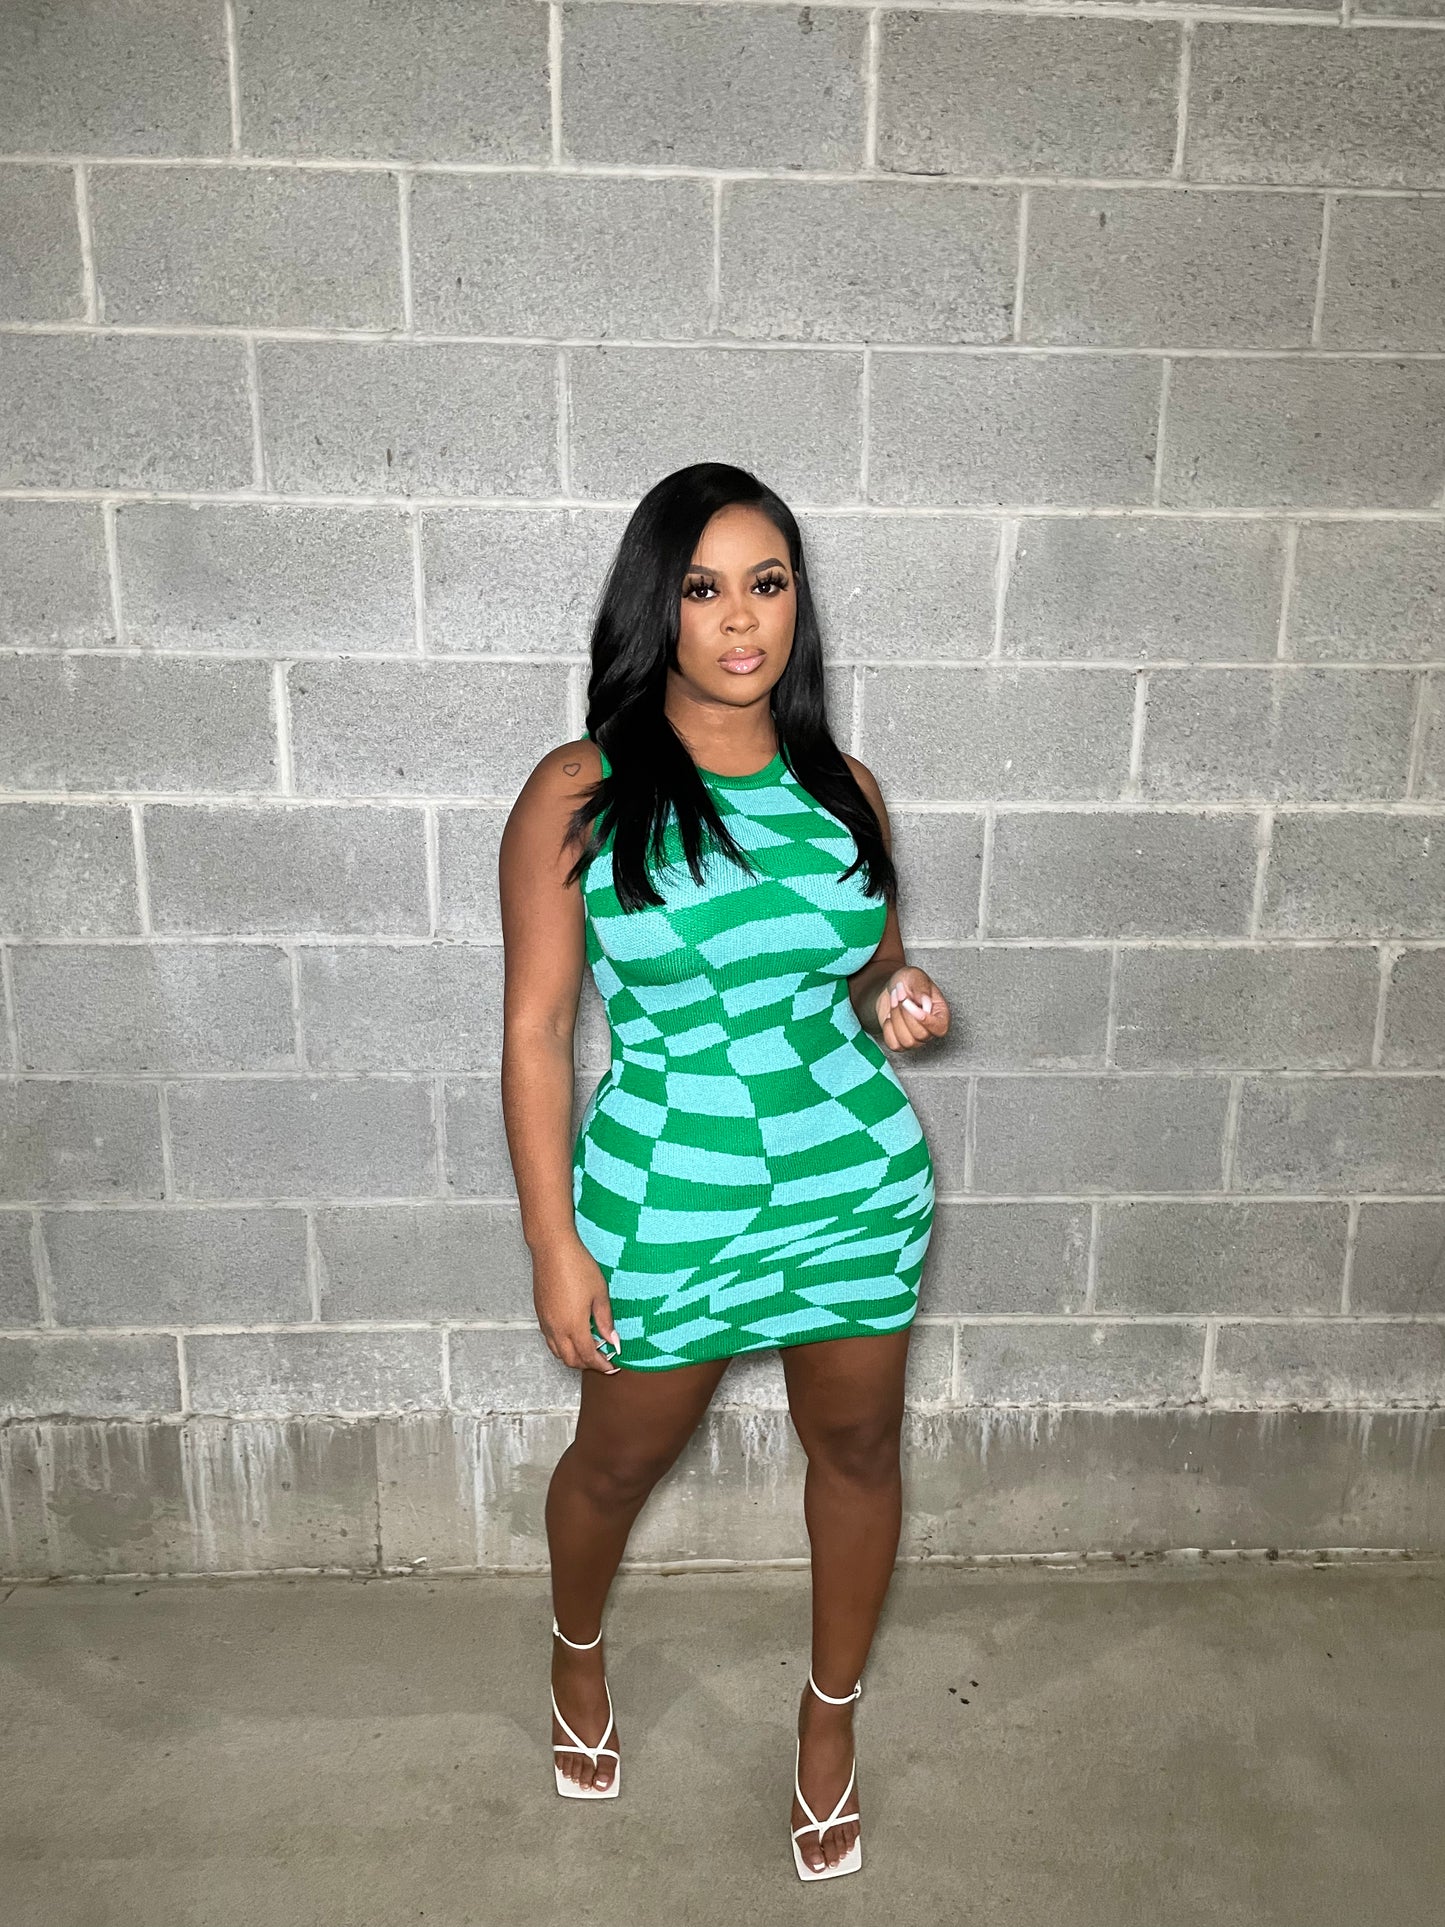 "Not Checkers" Dress